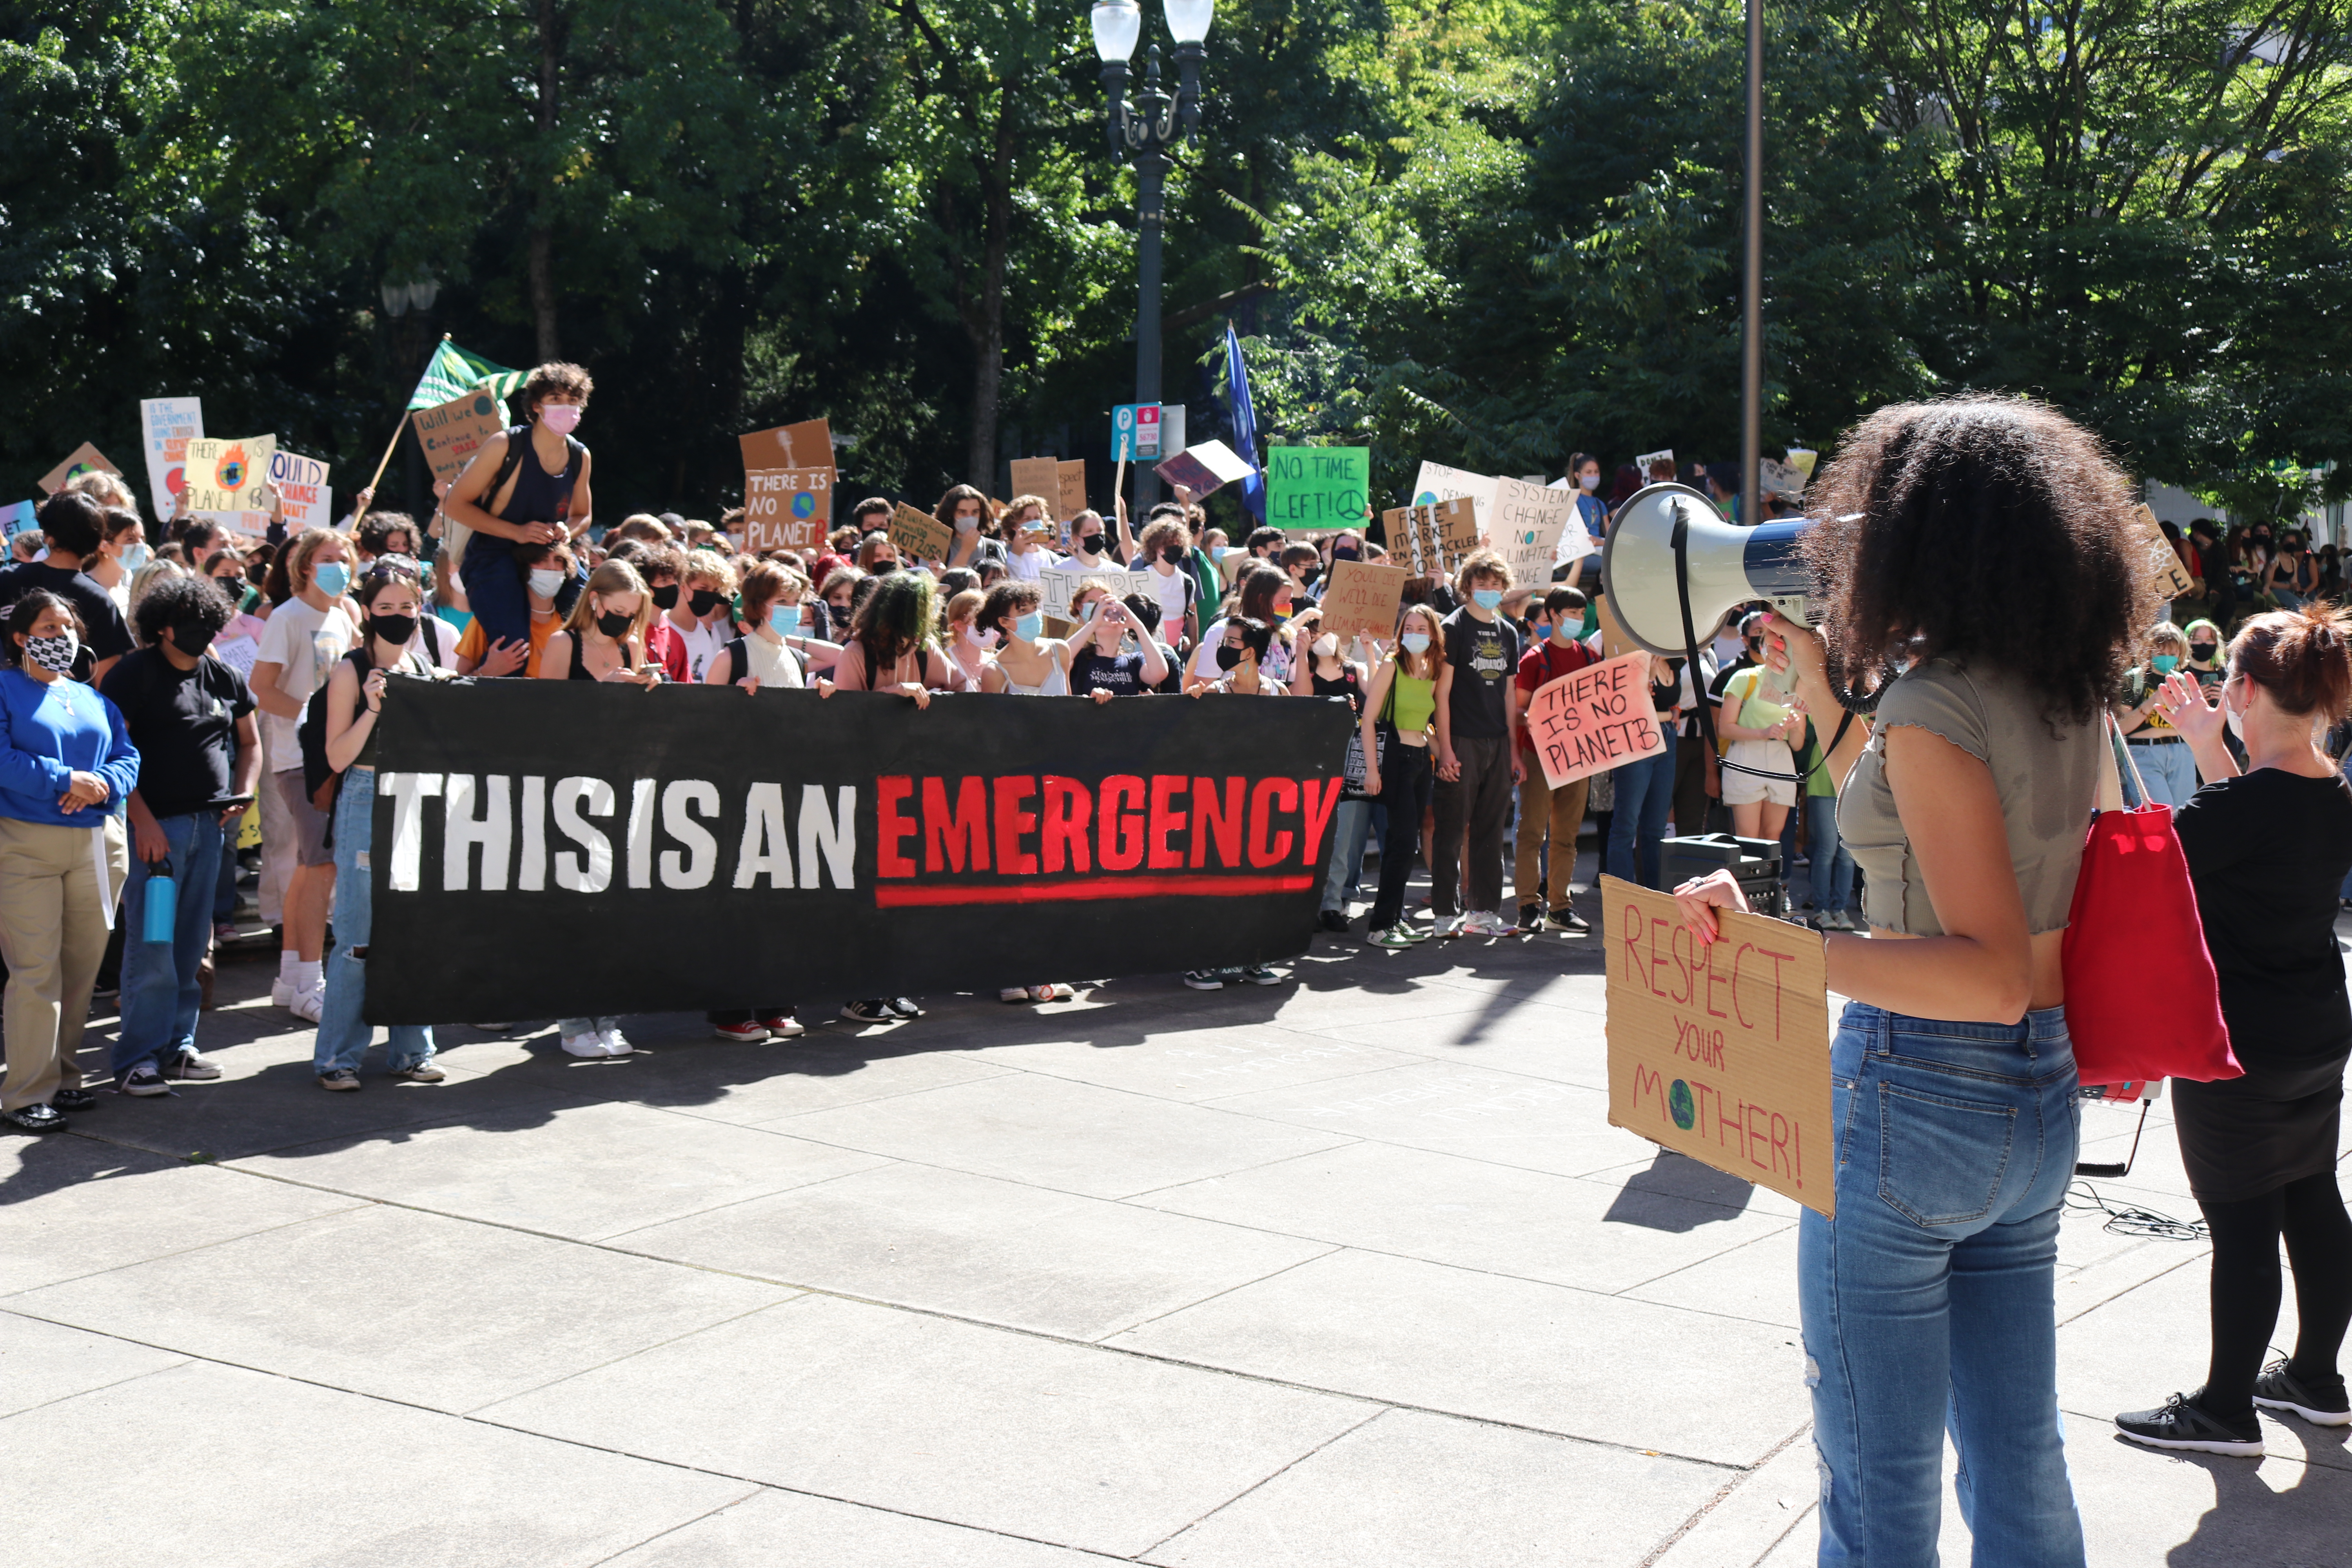 A Note from Peoples Climate Movement - Peoples Climate Movement